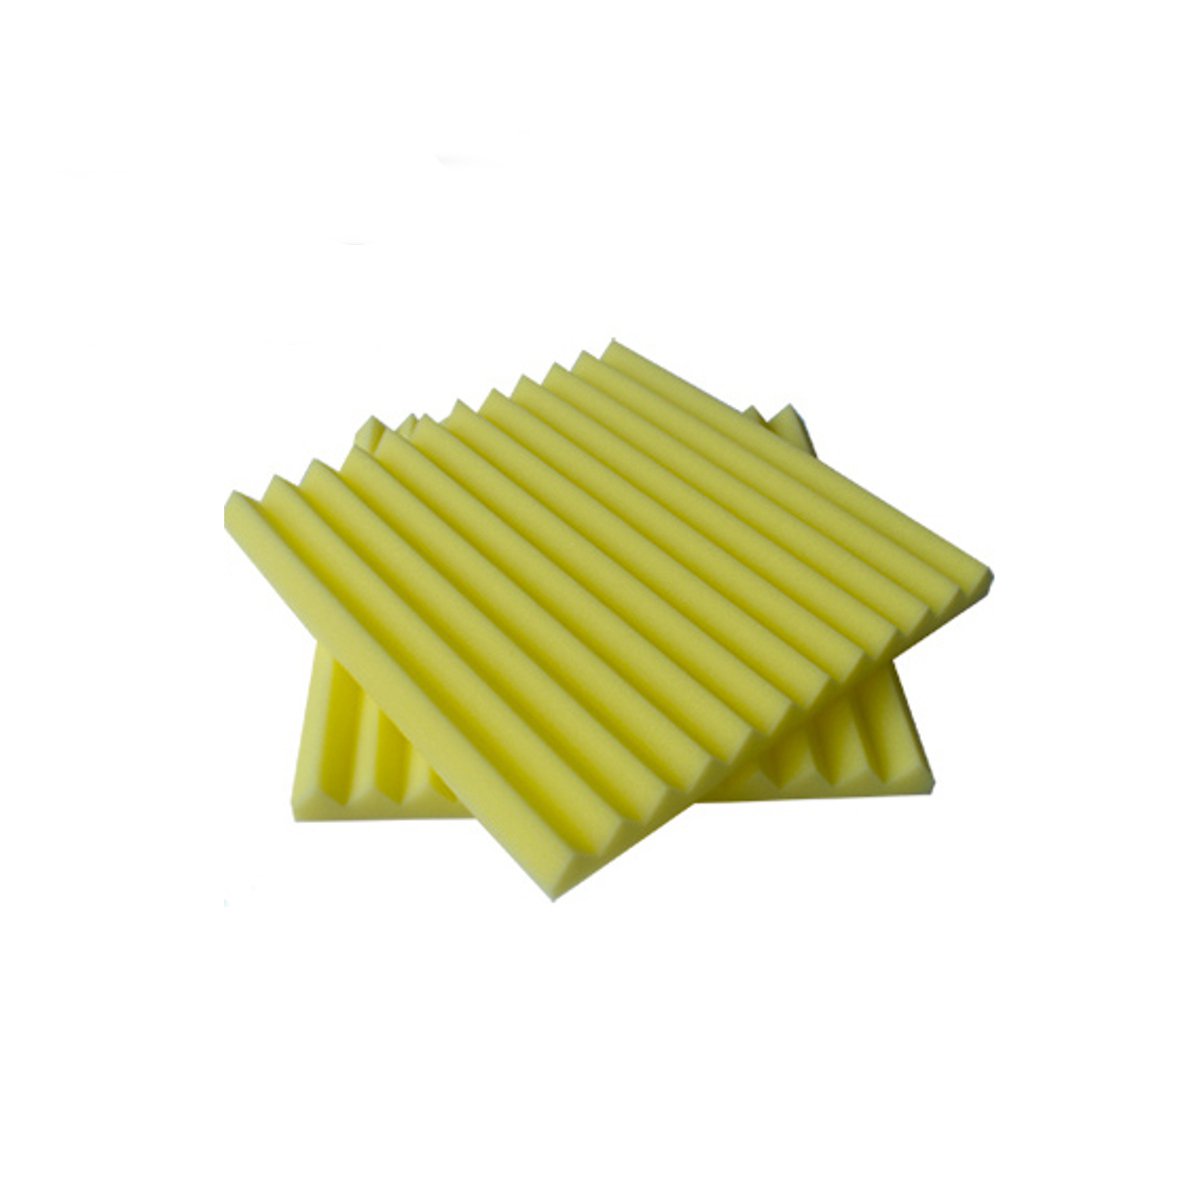 Find 6PCS Acoustic Foam Panel Sound Stop Absorption Sponge Studio KTV 25x25x2cm for Sale on Gipsybee.com with cryptocurrencies